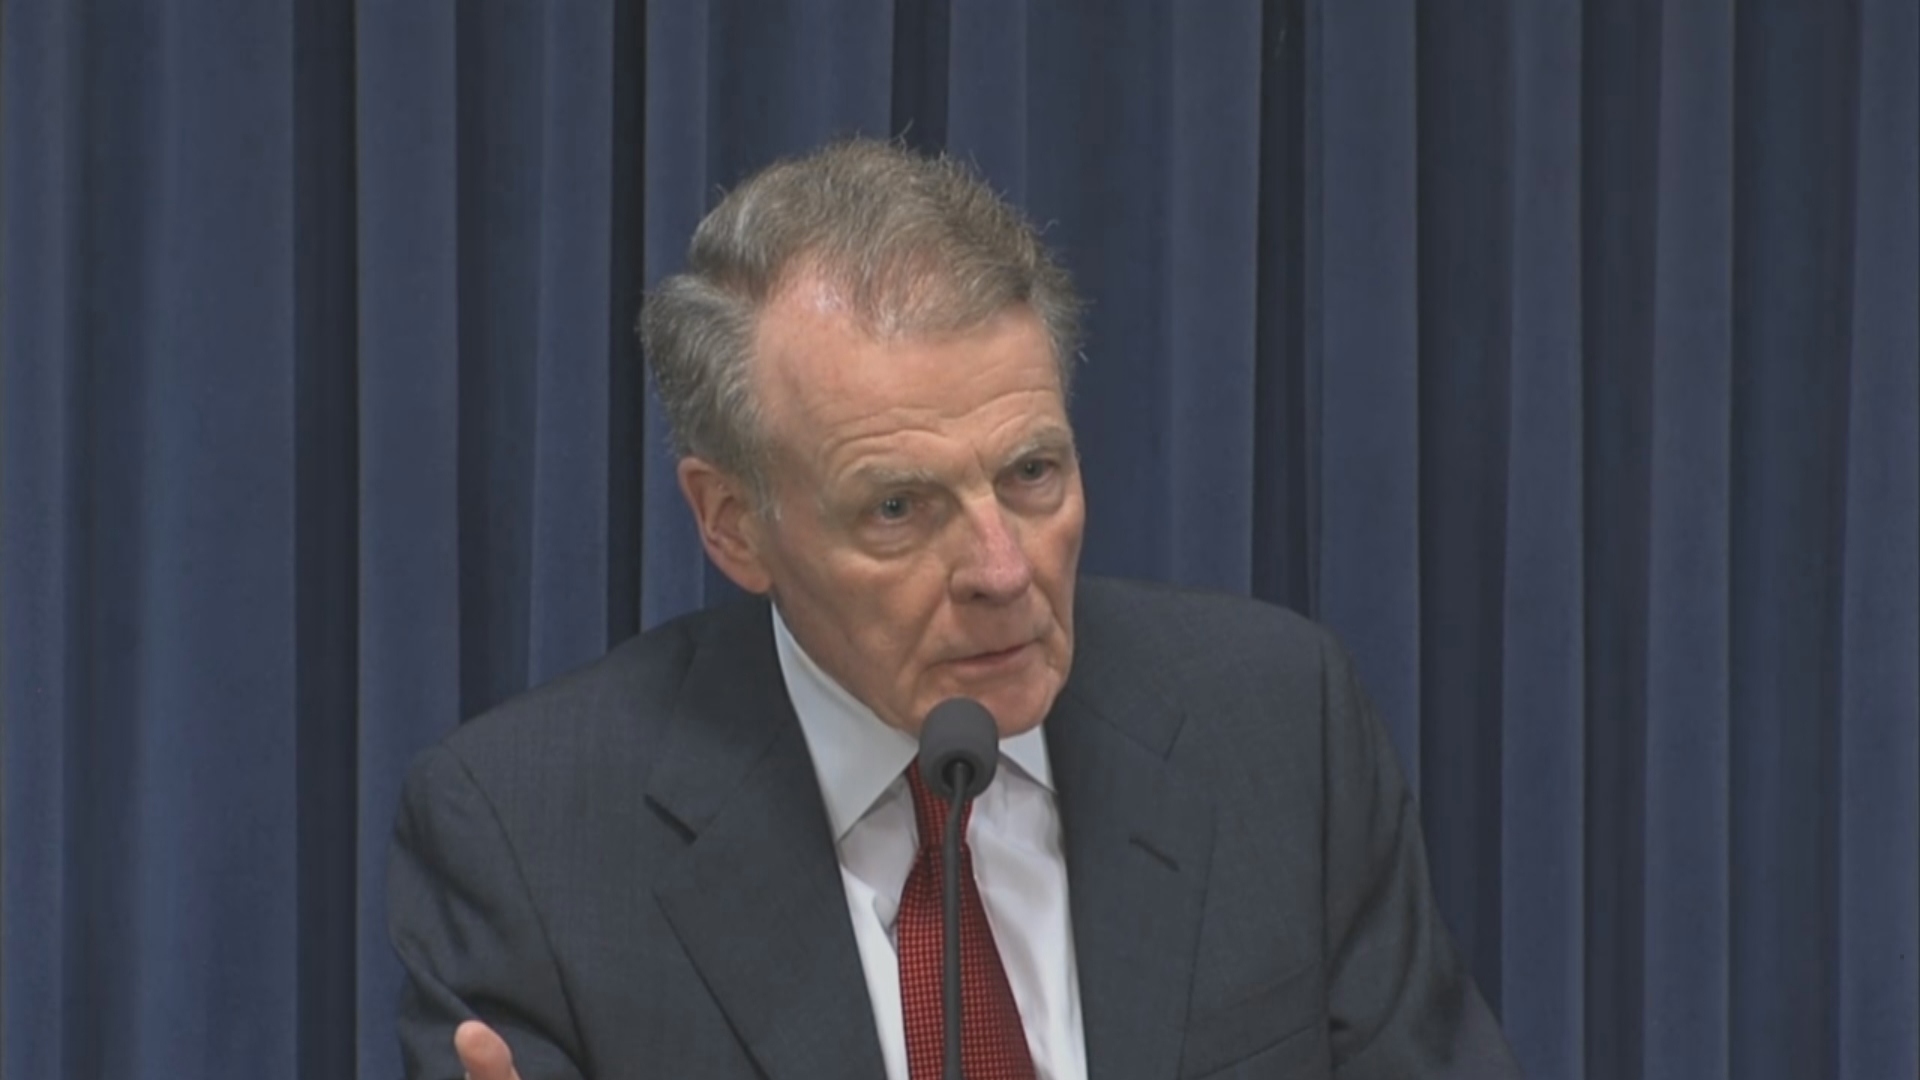 Week in Review: Another Indictment for Michael Madigan